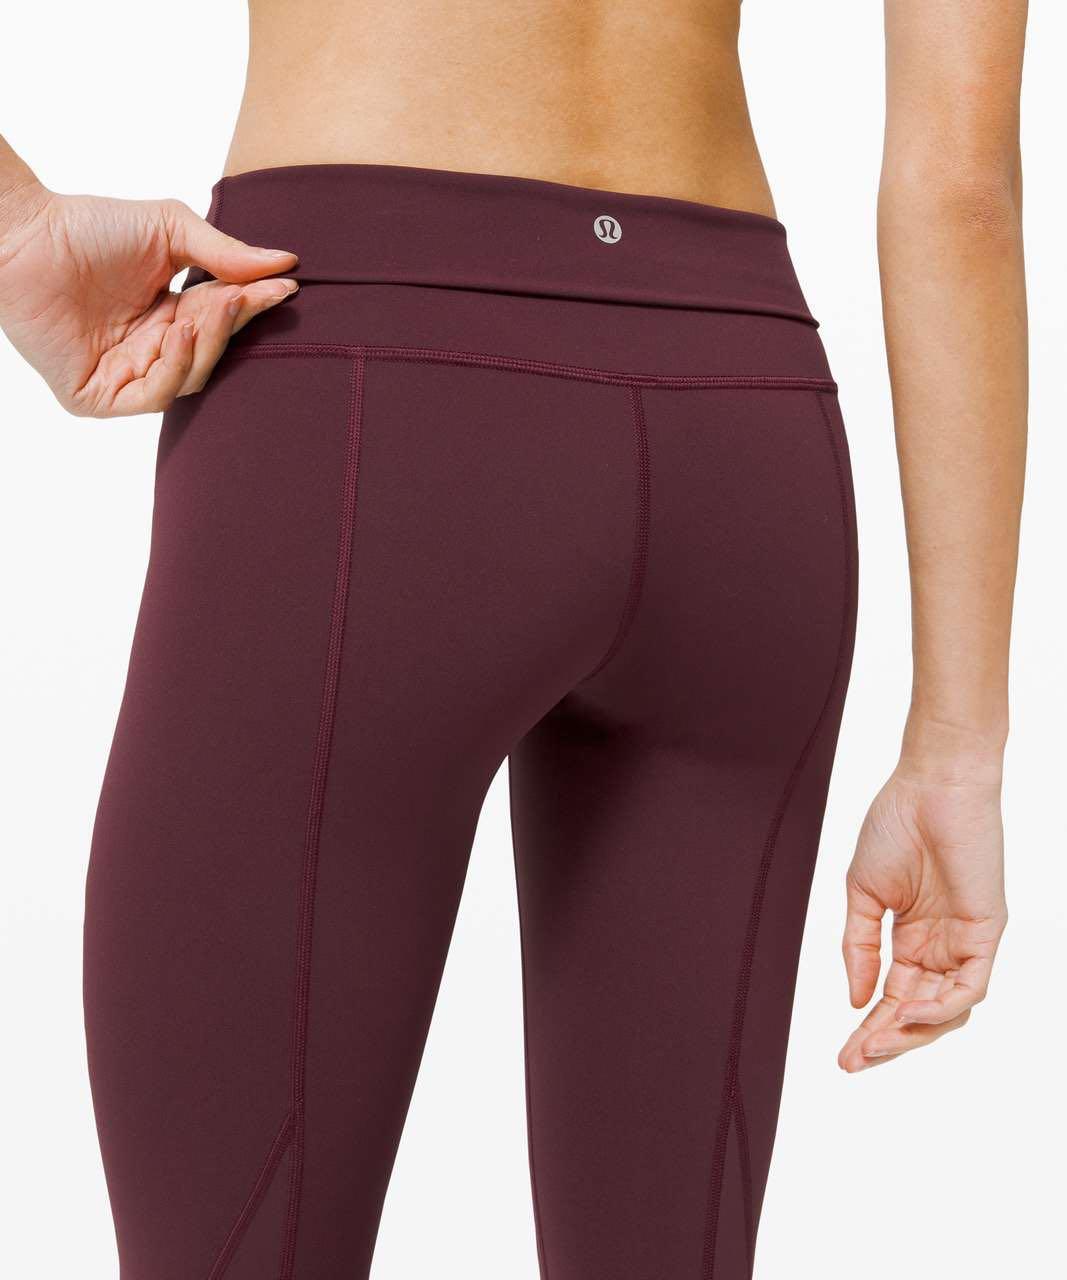 Lululemon WUNDER UNDER CROP HIGH-RISE *ROLL DOWN SCALLOP FULL-ON LUXTREME  23 Cassis, Women's Fashion, Activewear on Carousell